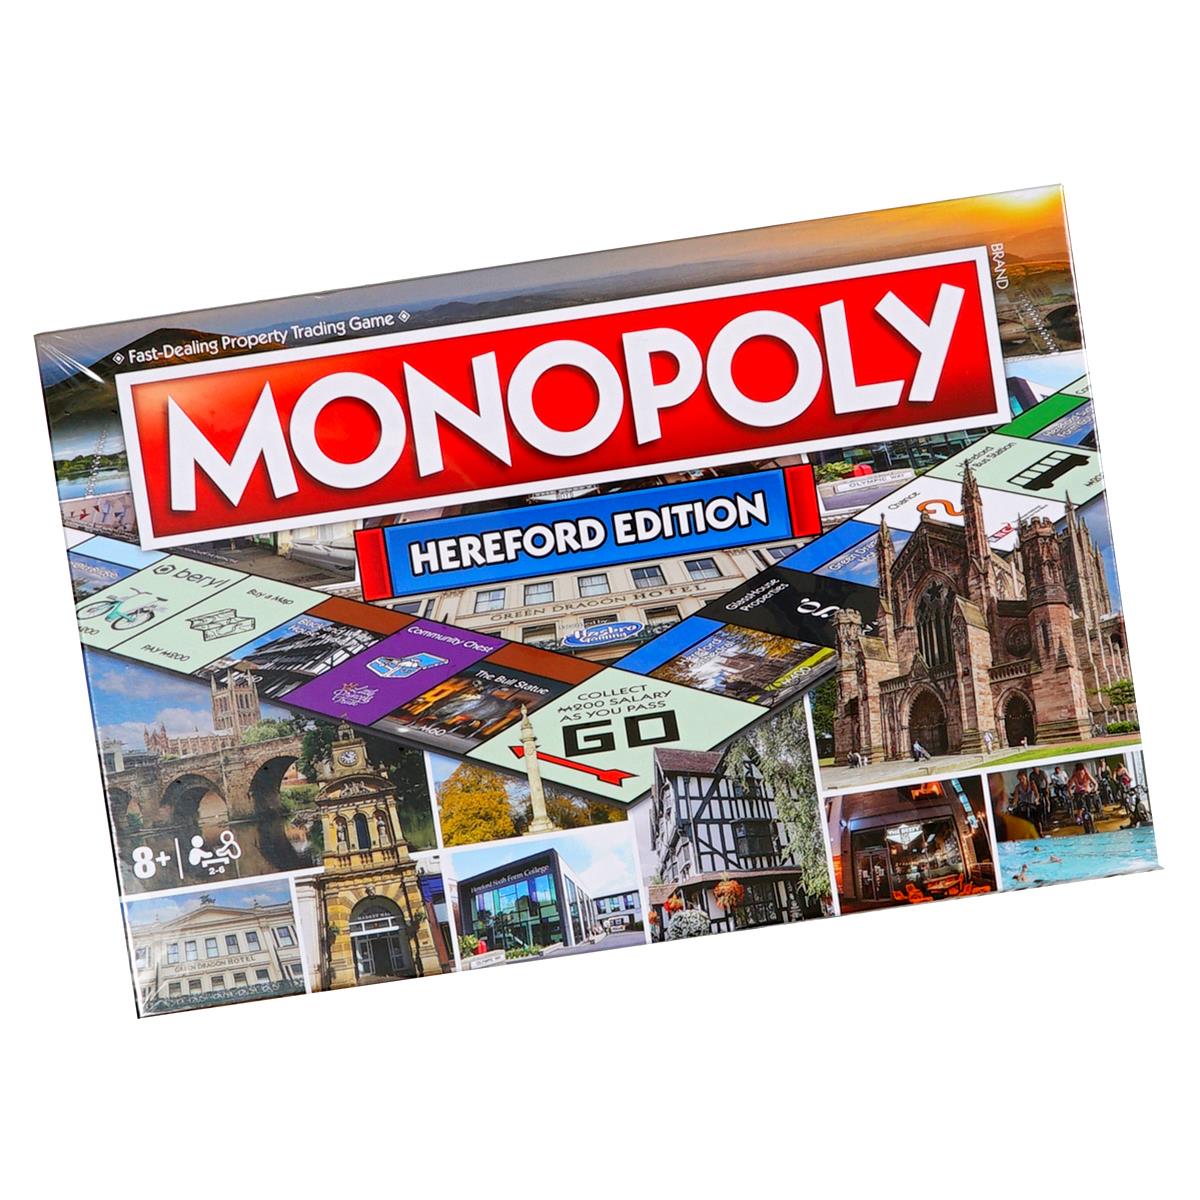 What progress did education in Hereford make in 2021 with the Hereford Monopoly game?